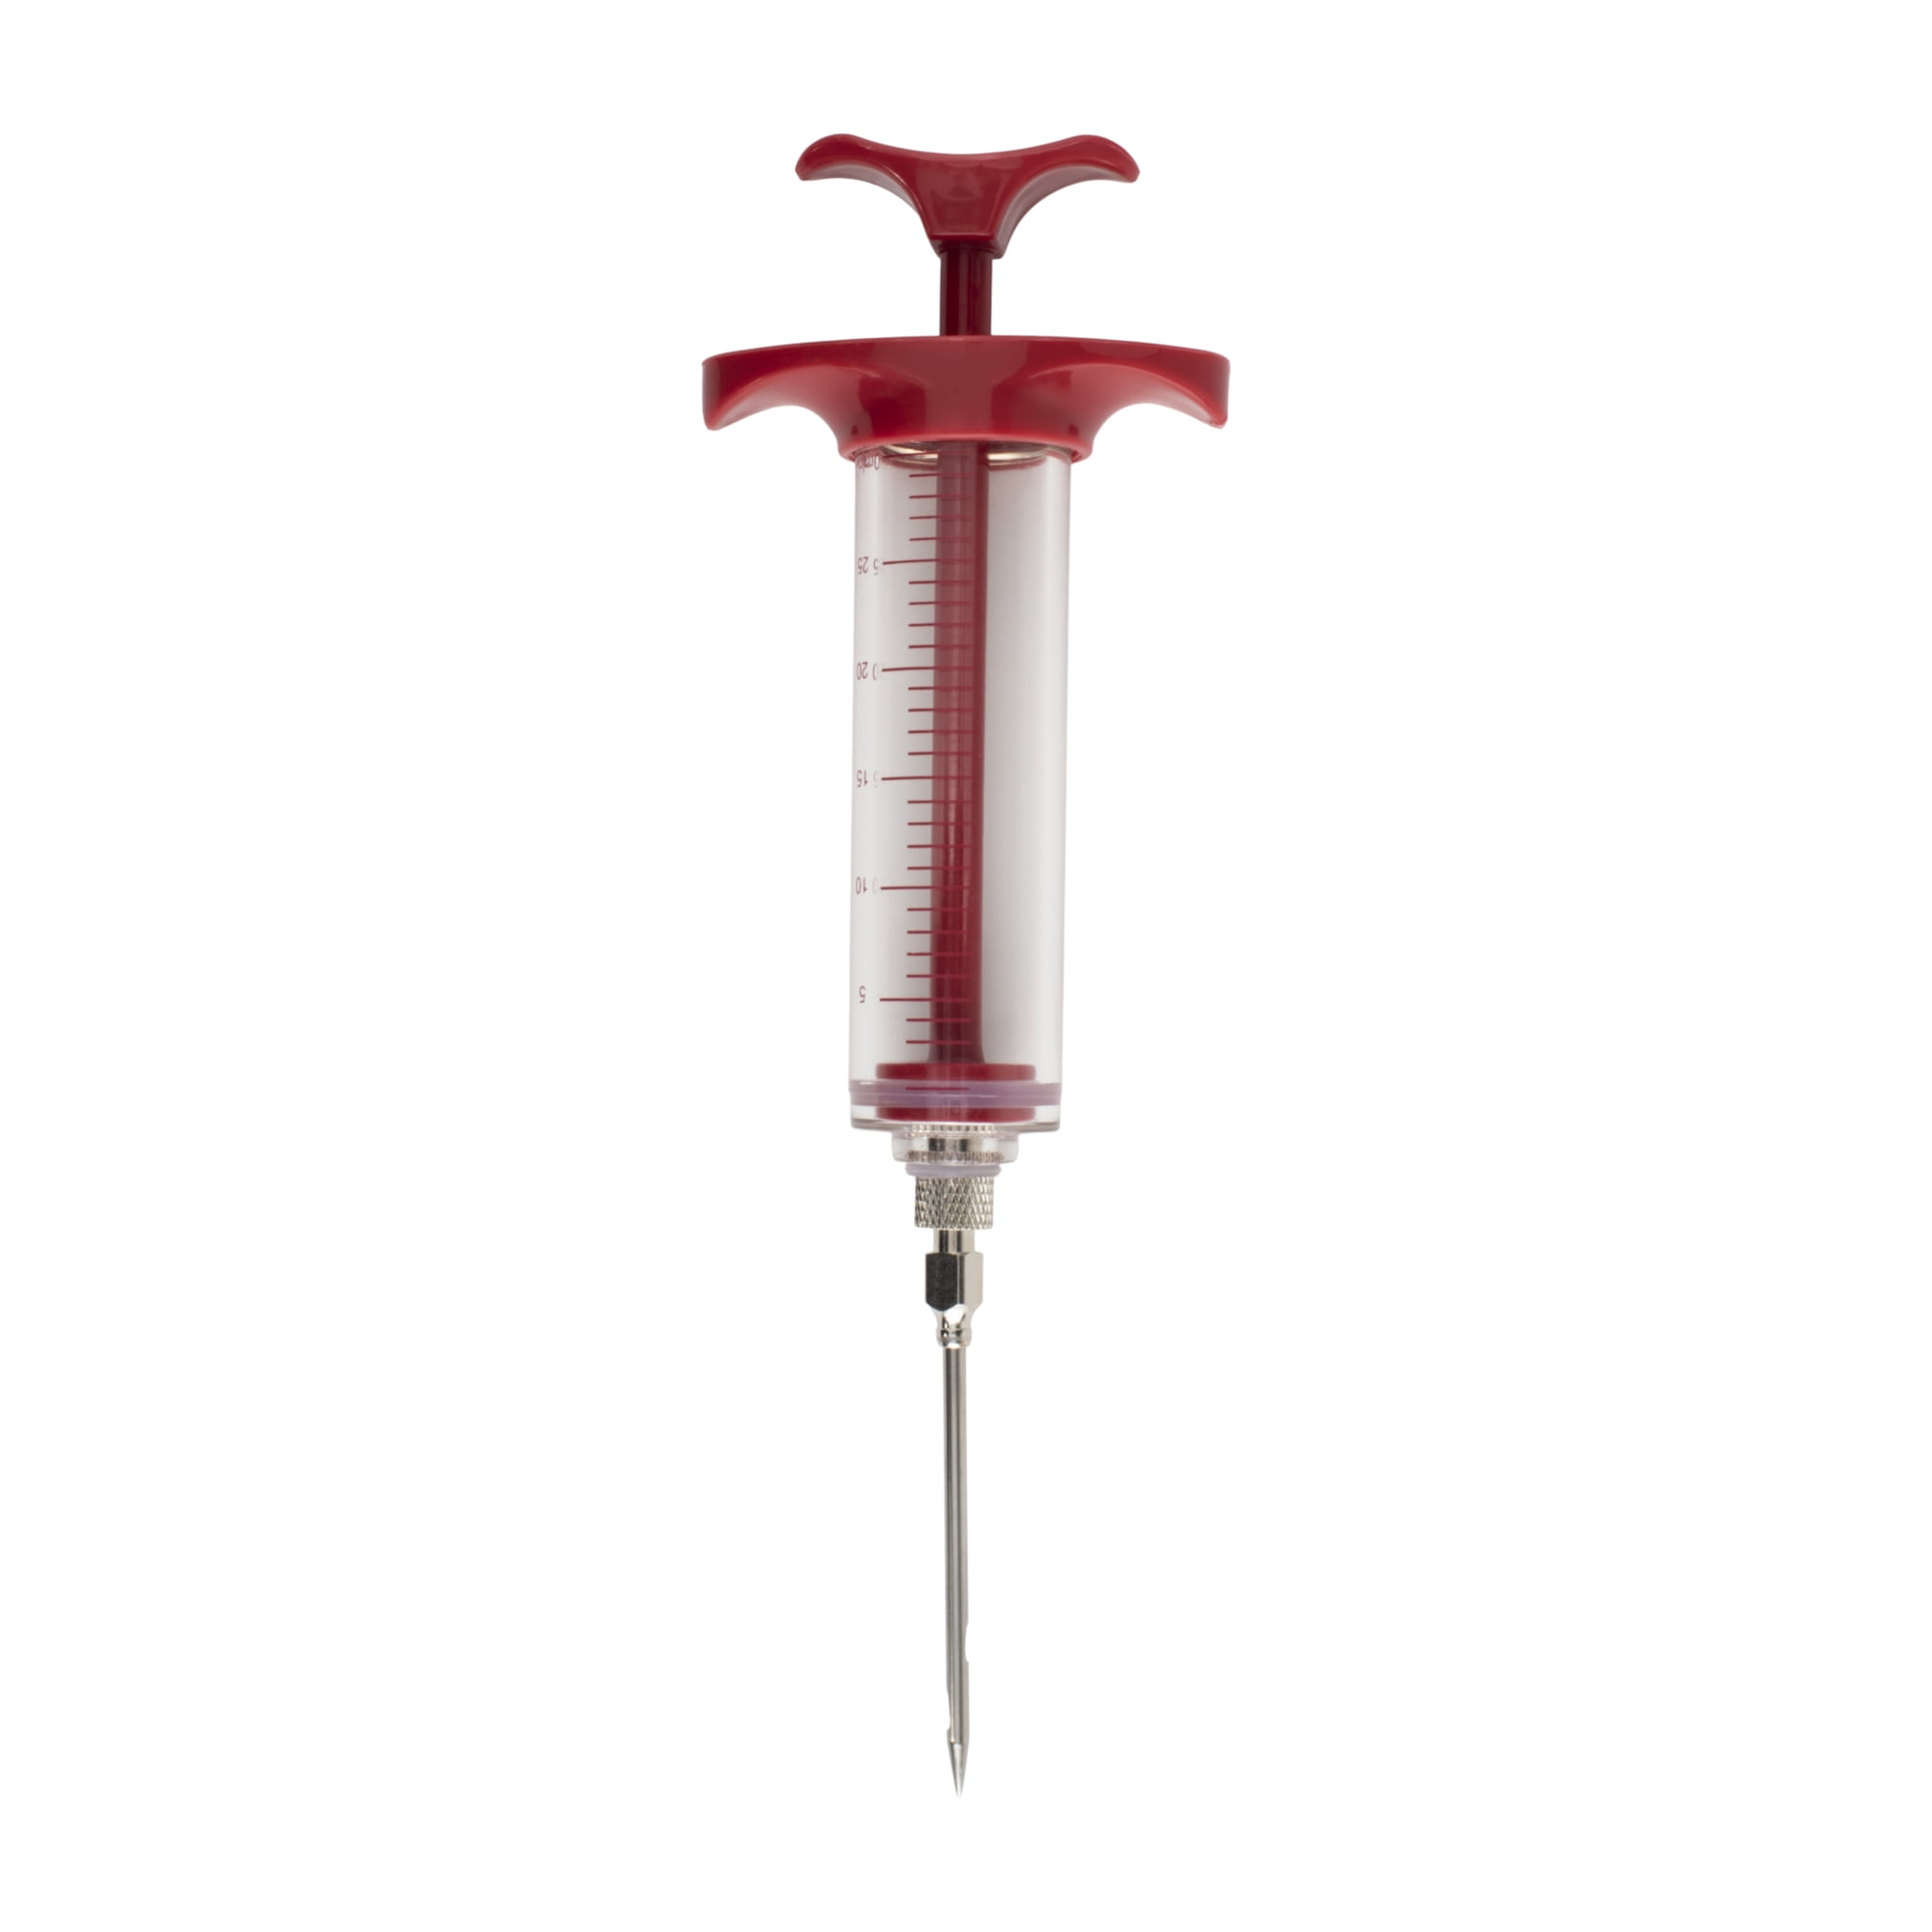 GoodCook 30 mL. Plastic Flavor Injector with Stainless Steel Needle, Clear/Red